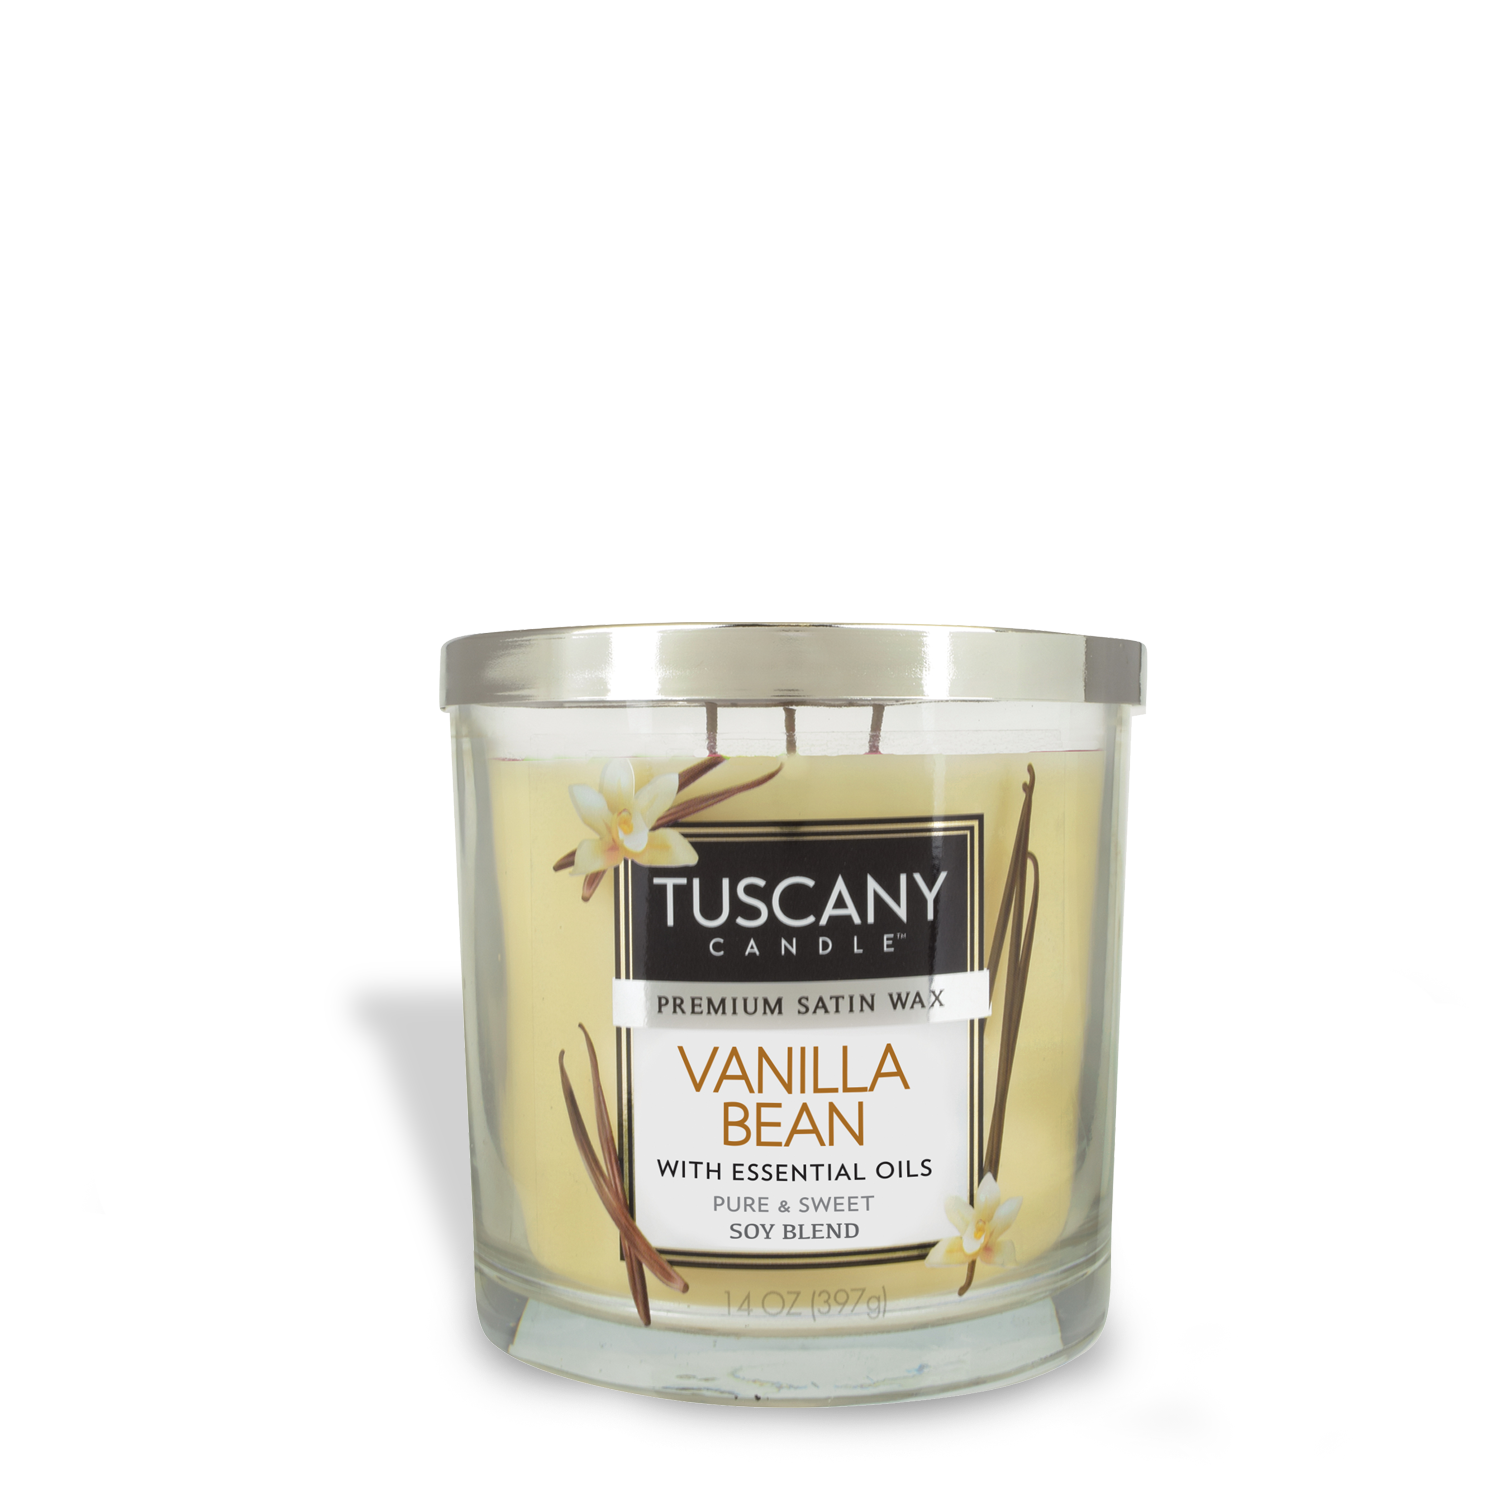 Tuscany Candle Vanilla Bean Long-Lasting Scented Jar Candle (14 oz) infused with essential oils for a delightful fragrance.